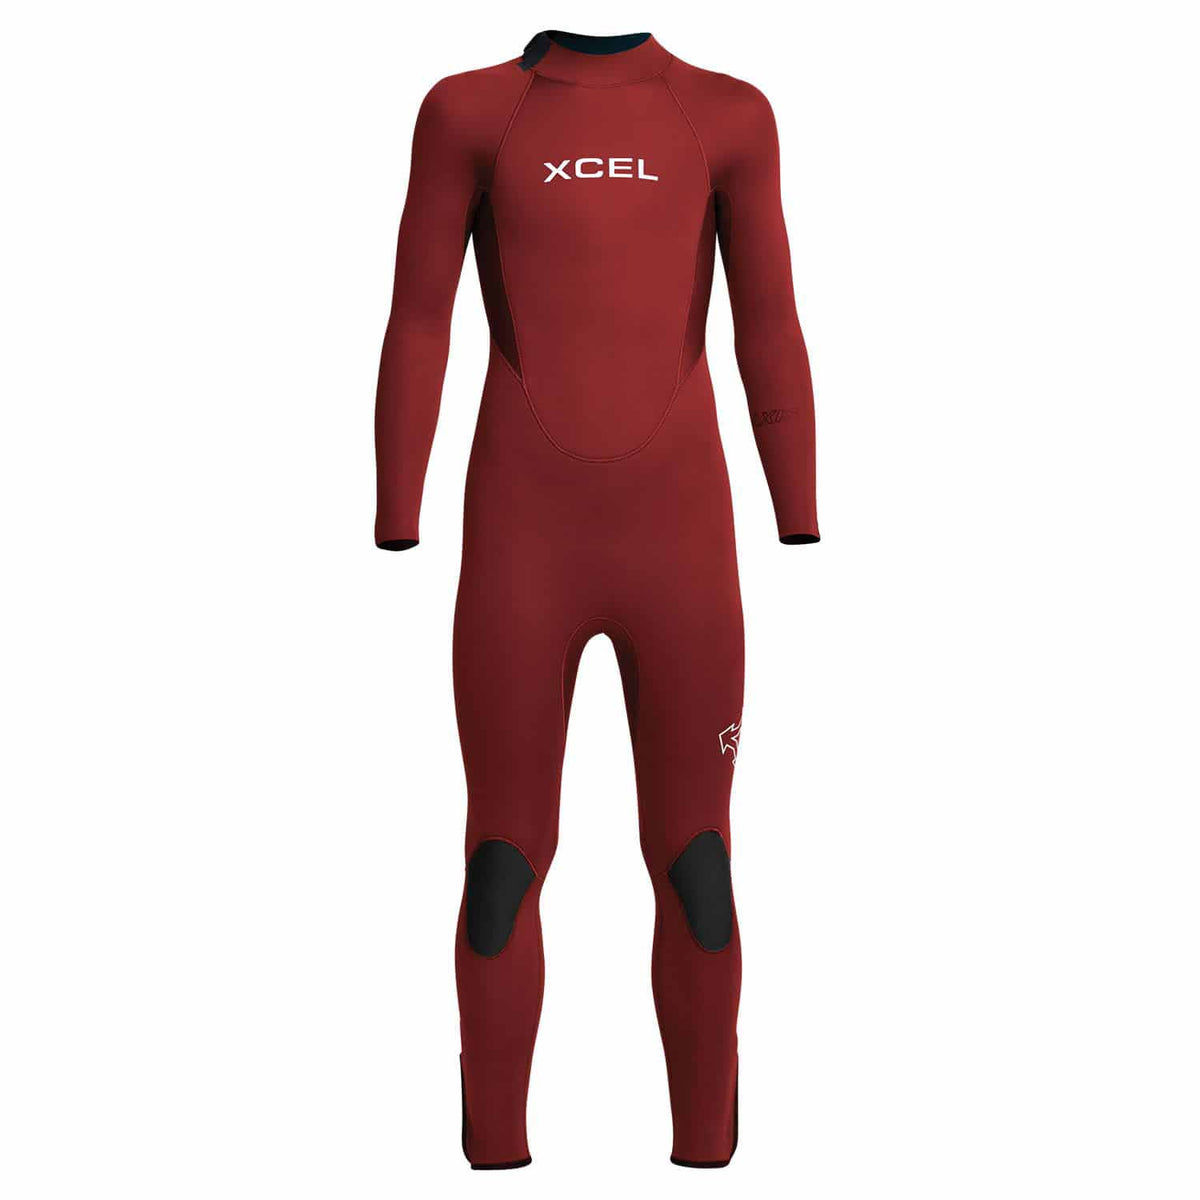 Xcel Youth 3/2mm Axis Back Zip Kids Wetsuit - Chilli Pepper - Kids Full Length Wetsuit by Xcel